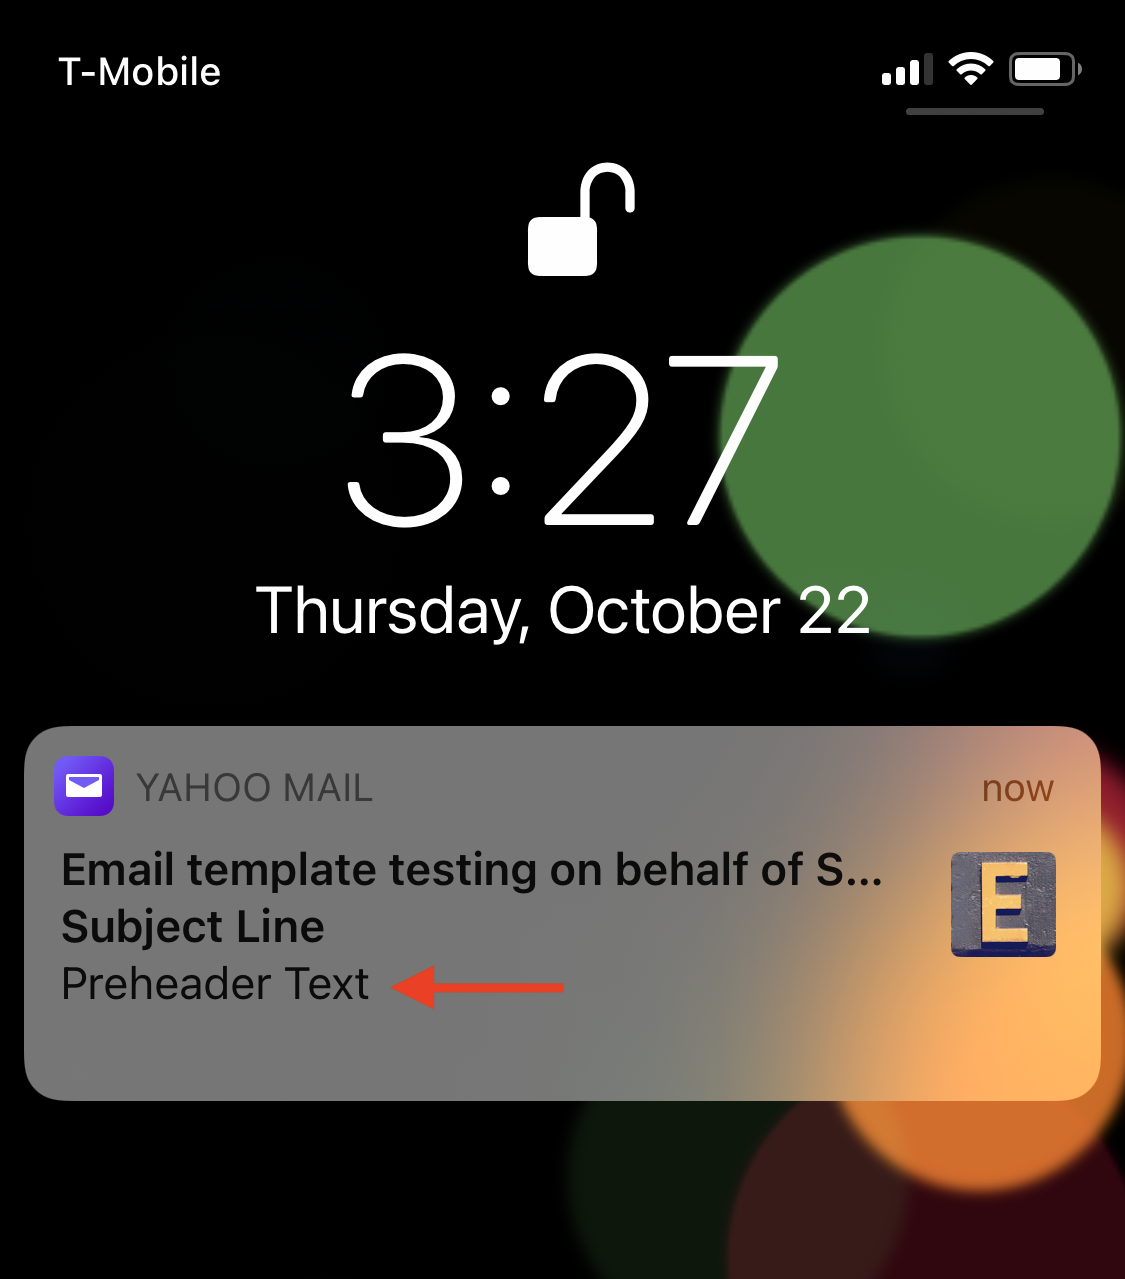 Preheader text example in the Push Notification, Yahoo Mail, iPhone 11 Pro